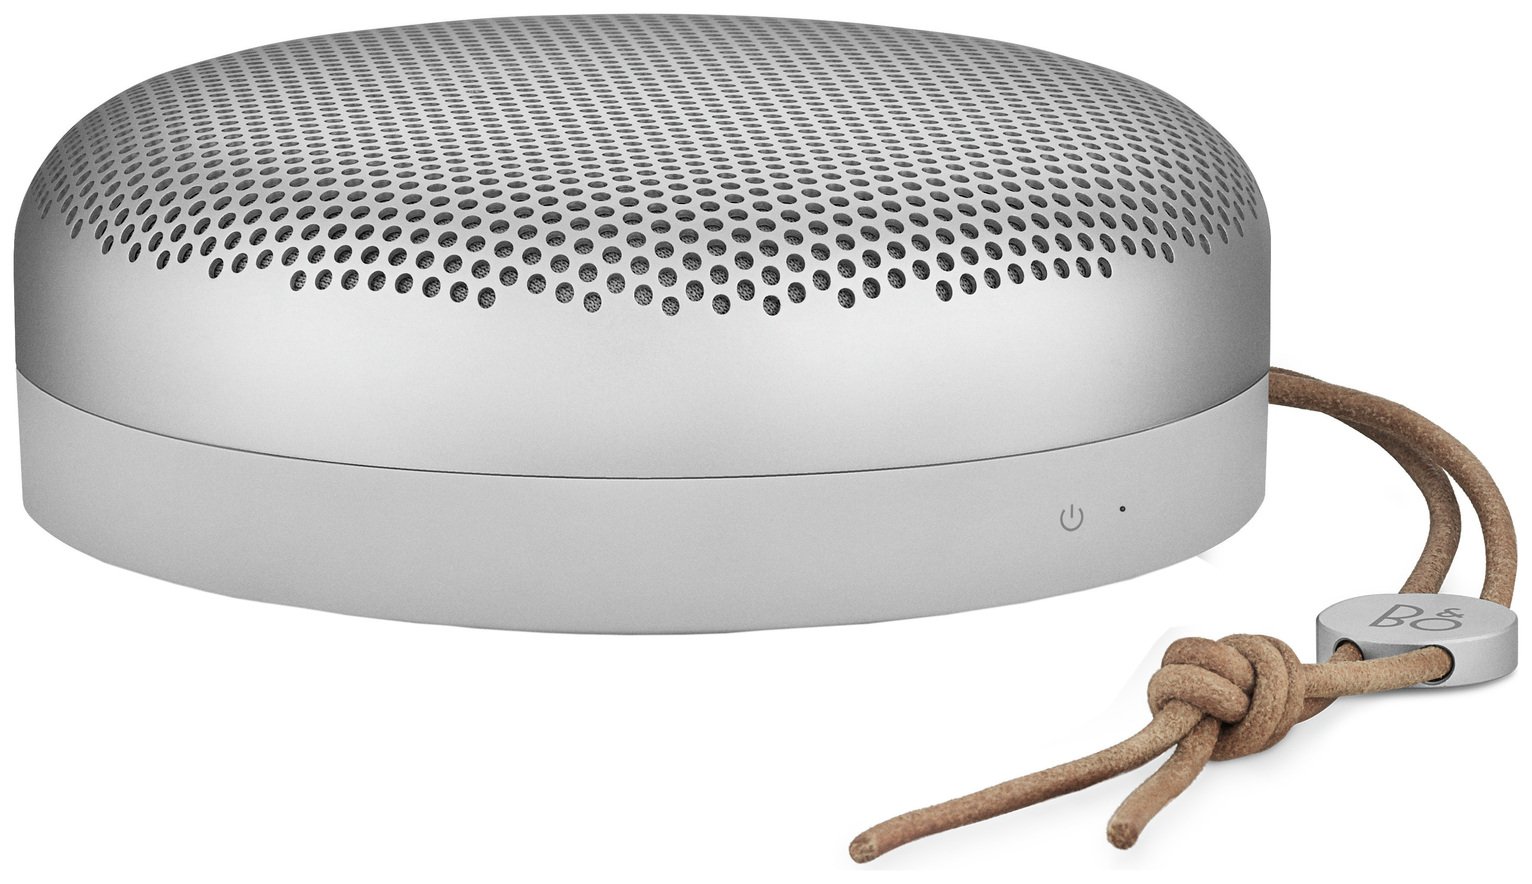 B&O Beoplay A1 Portable Bluetooth Speaker - Natural